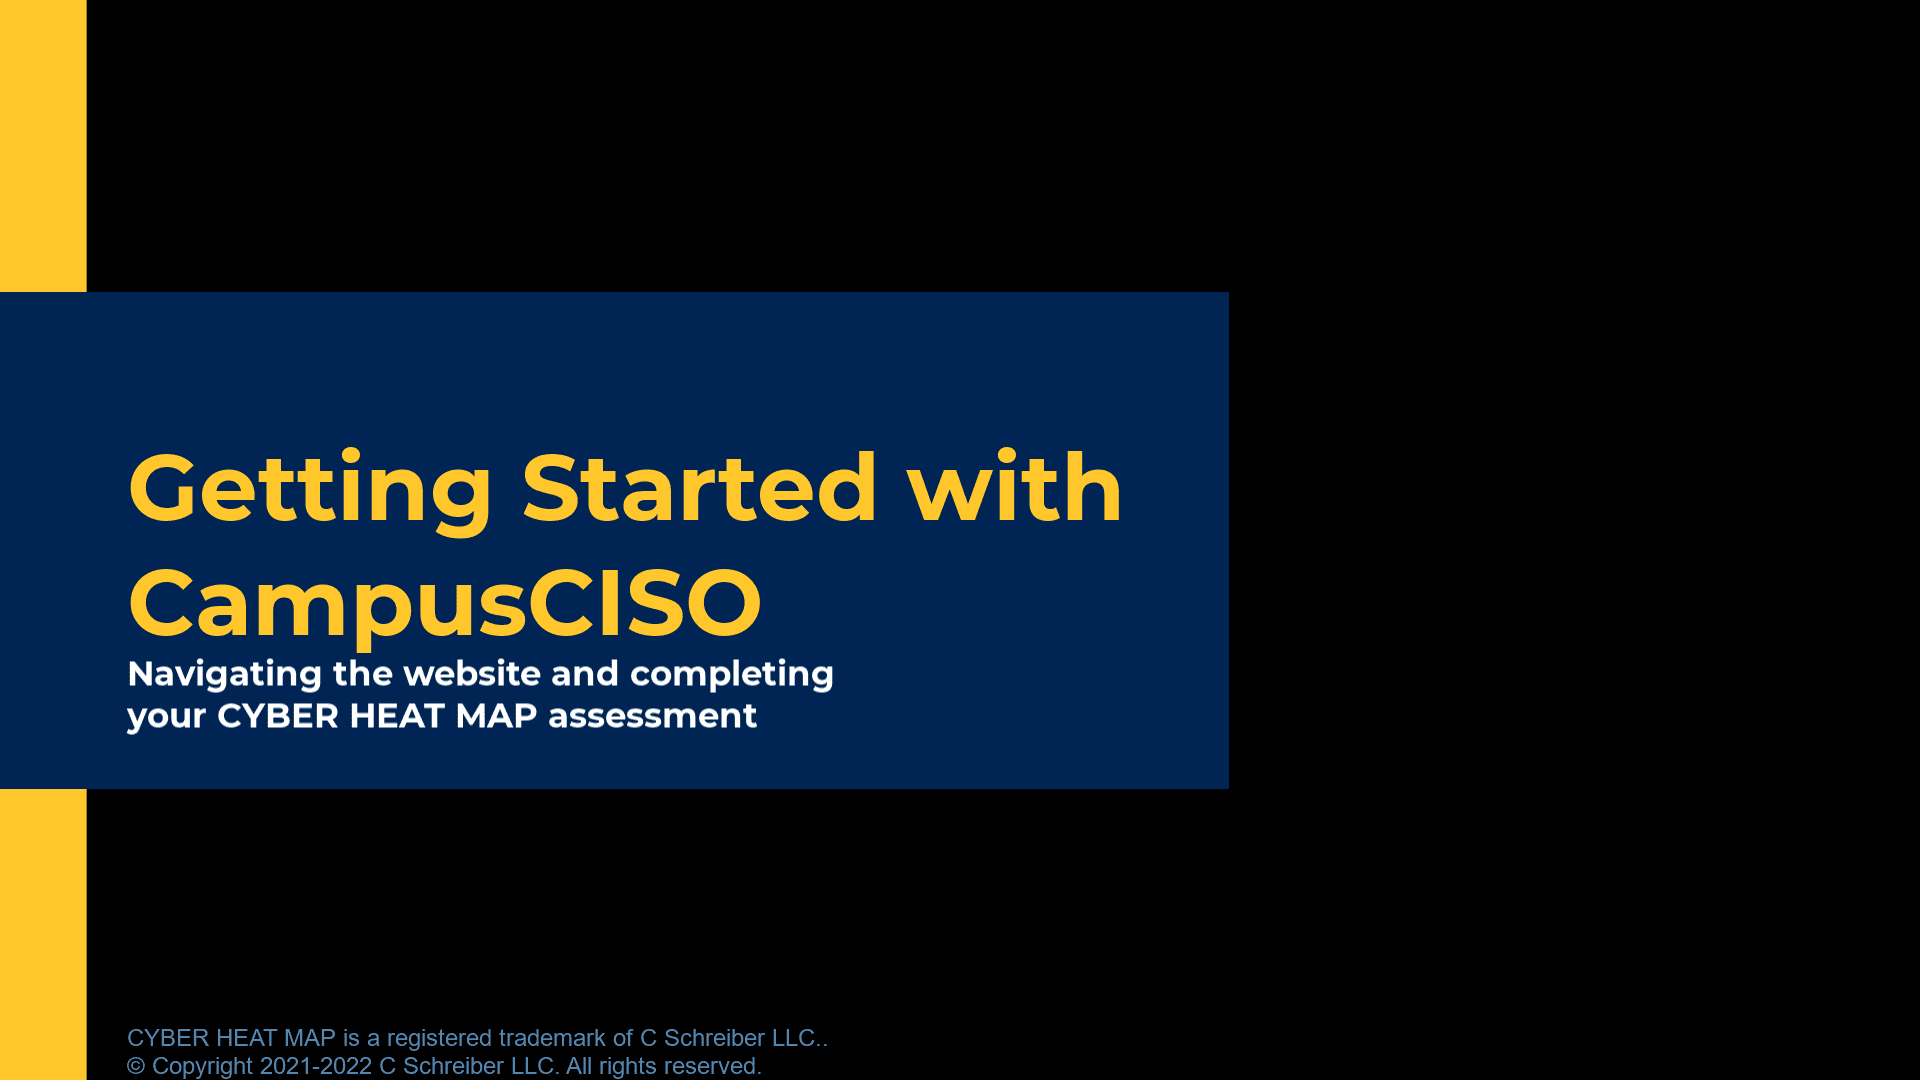 Getting Started with CampusCISO - video title screenshot